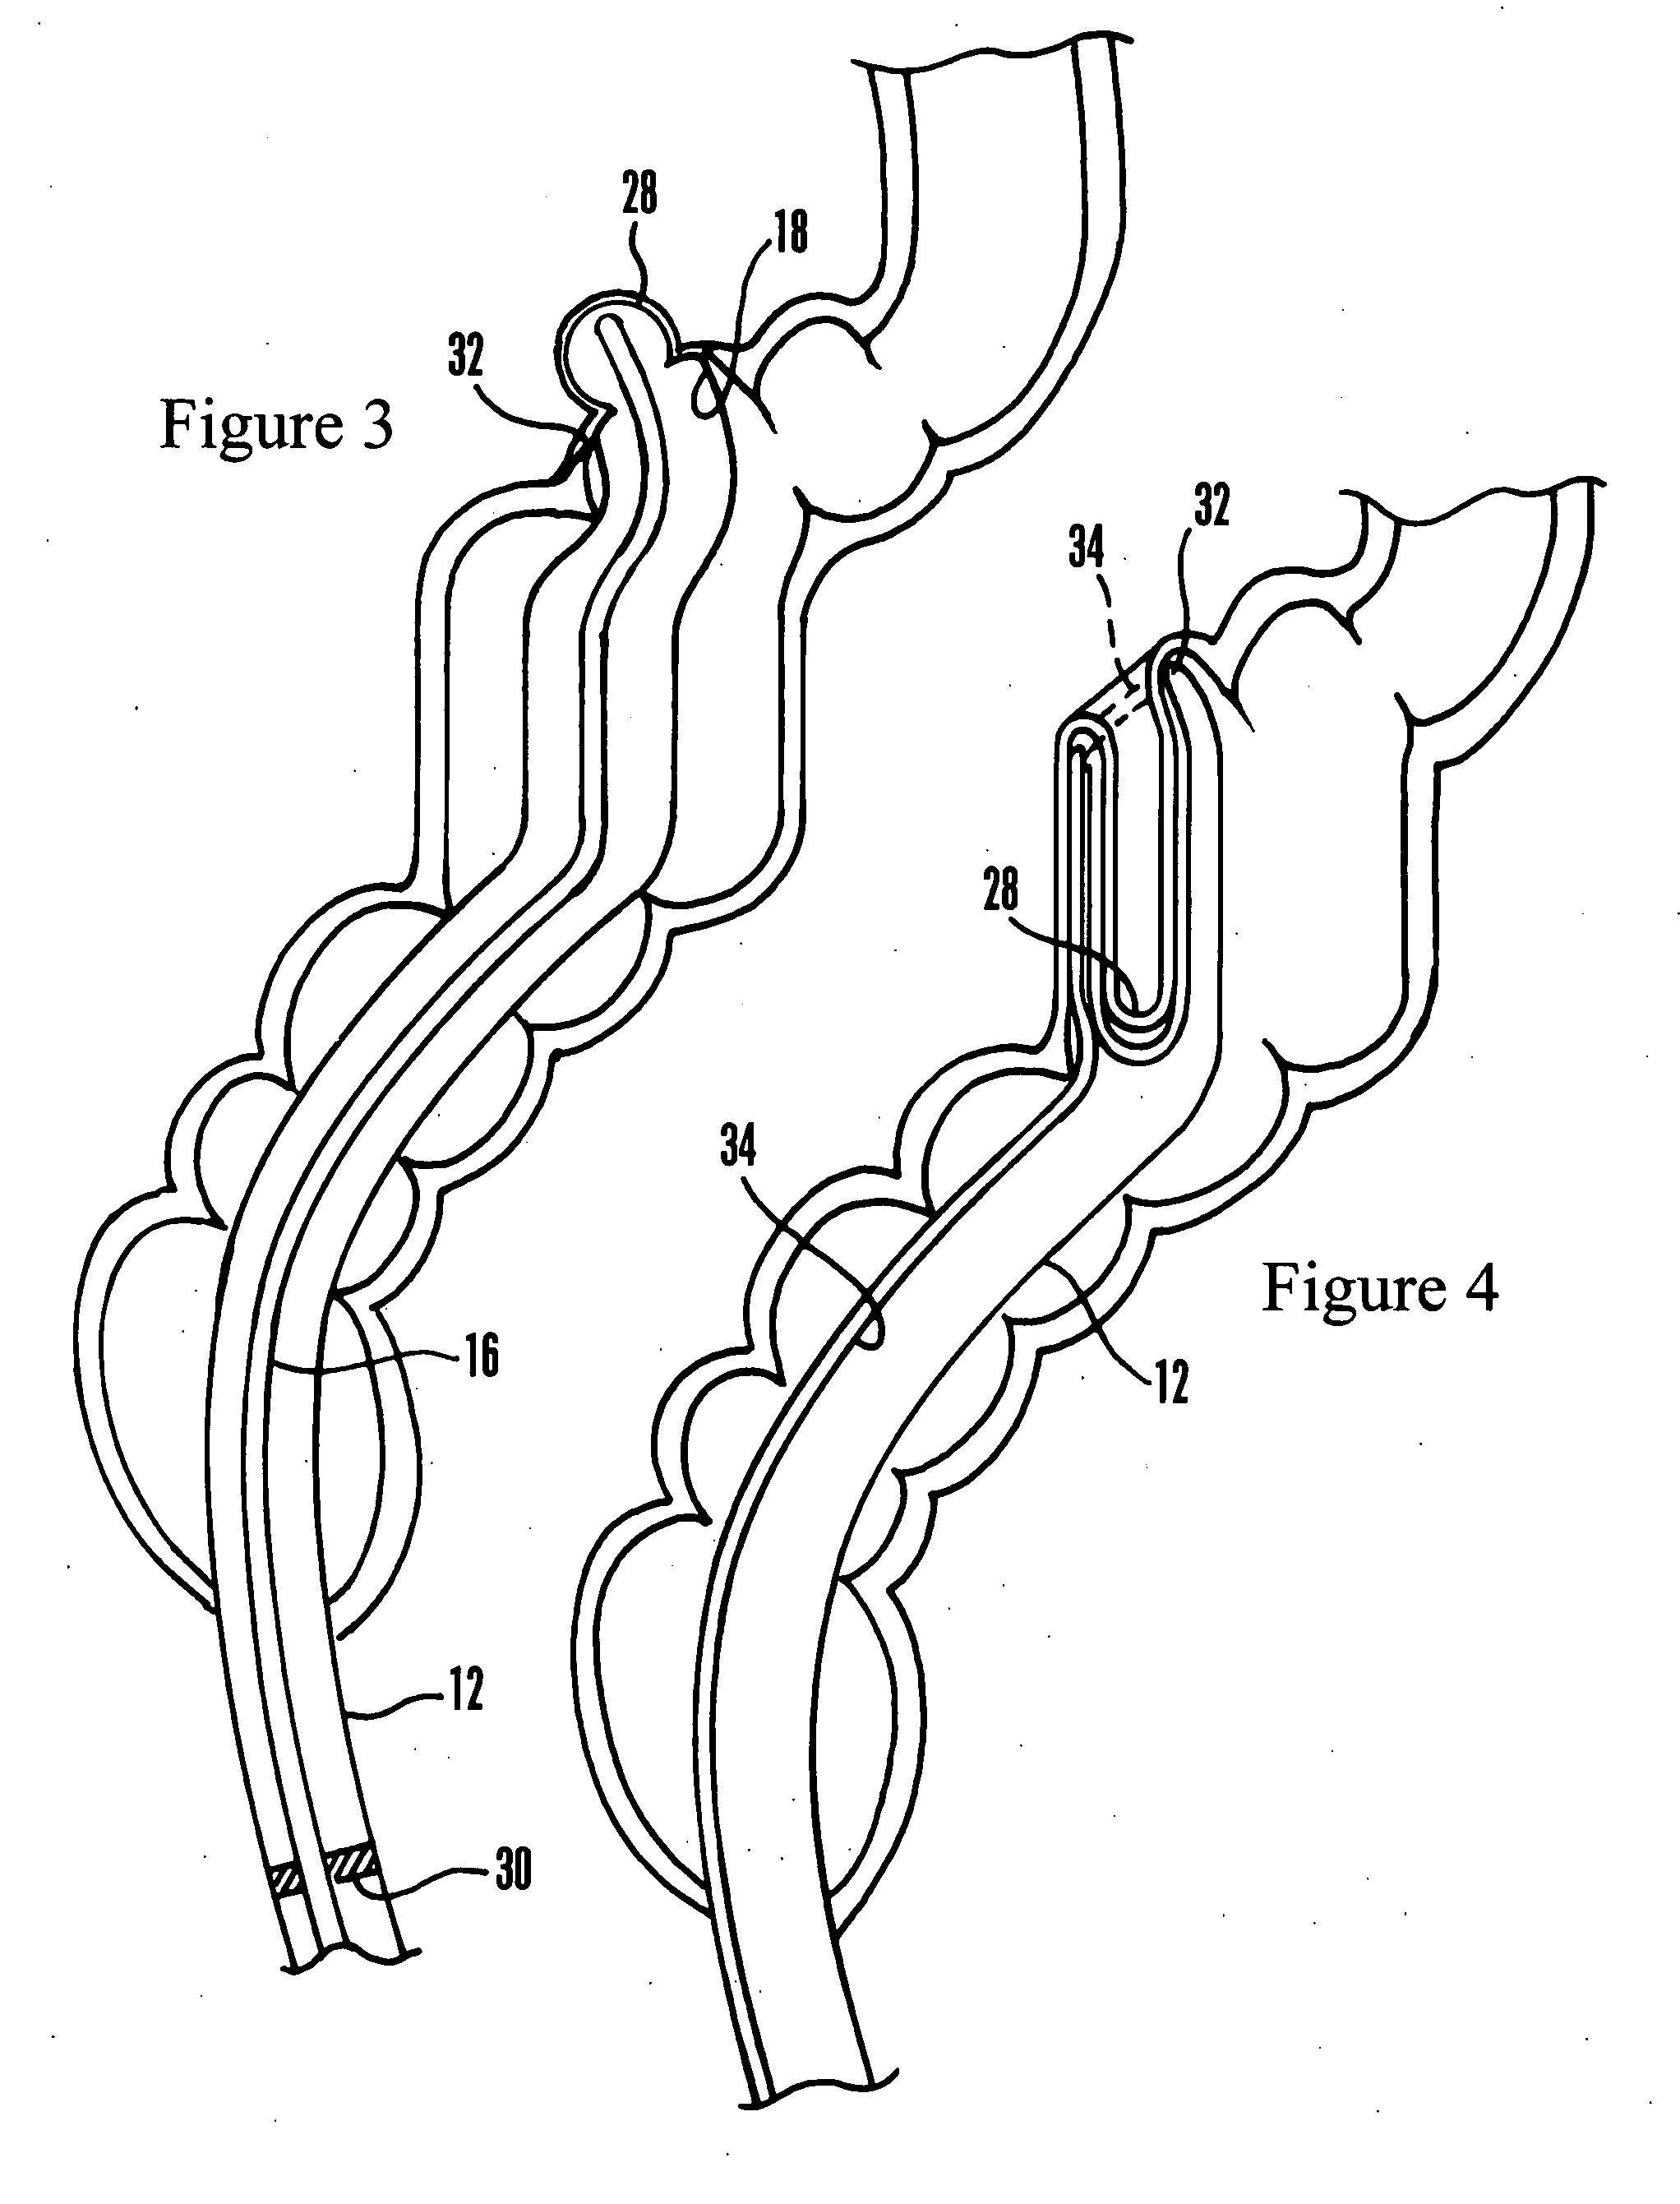 Systems and methods for endoscopic treatment of diverticula